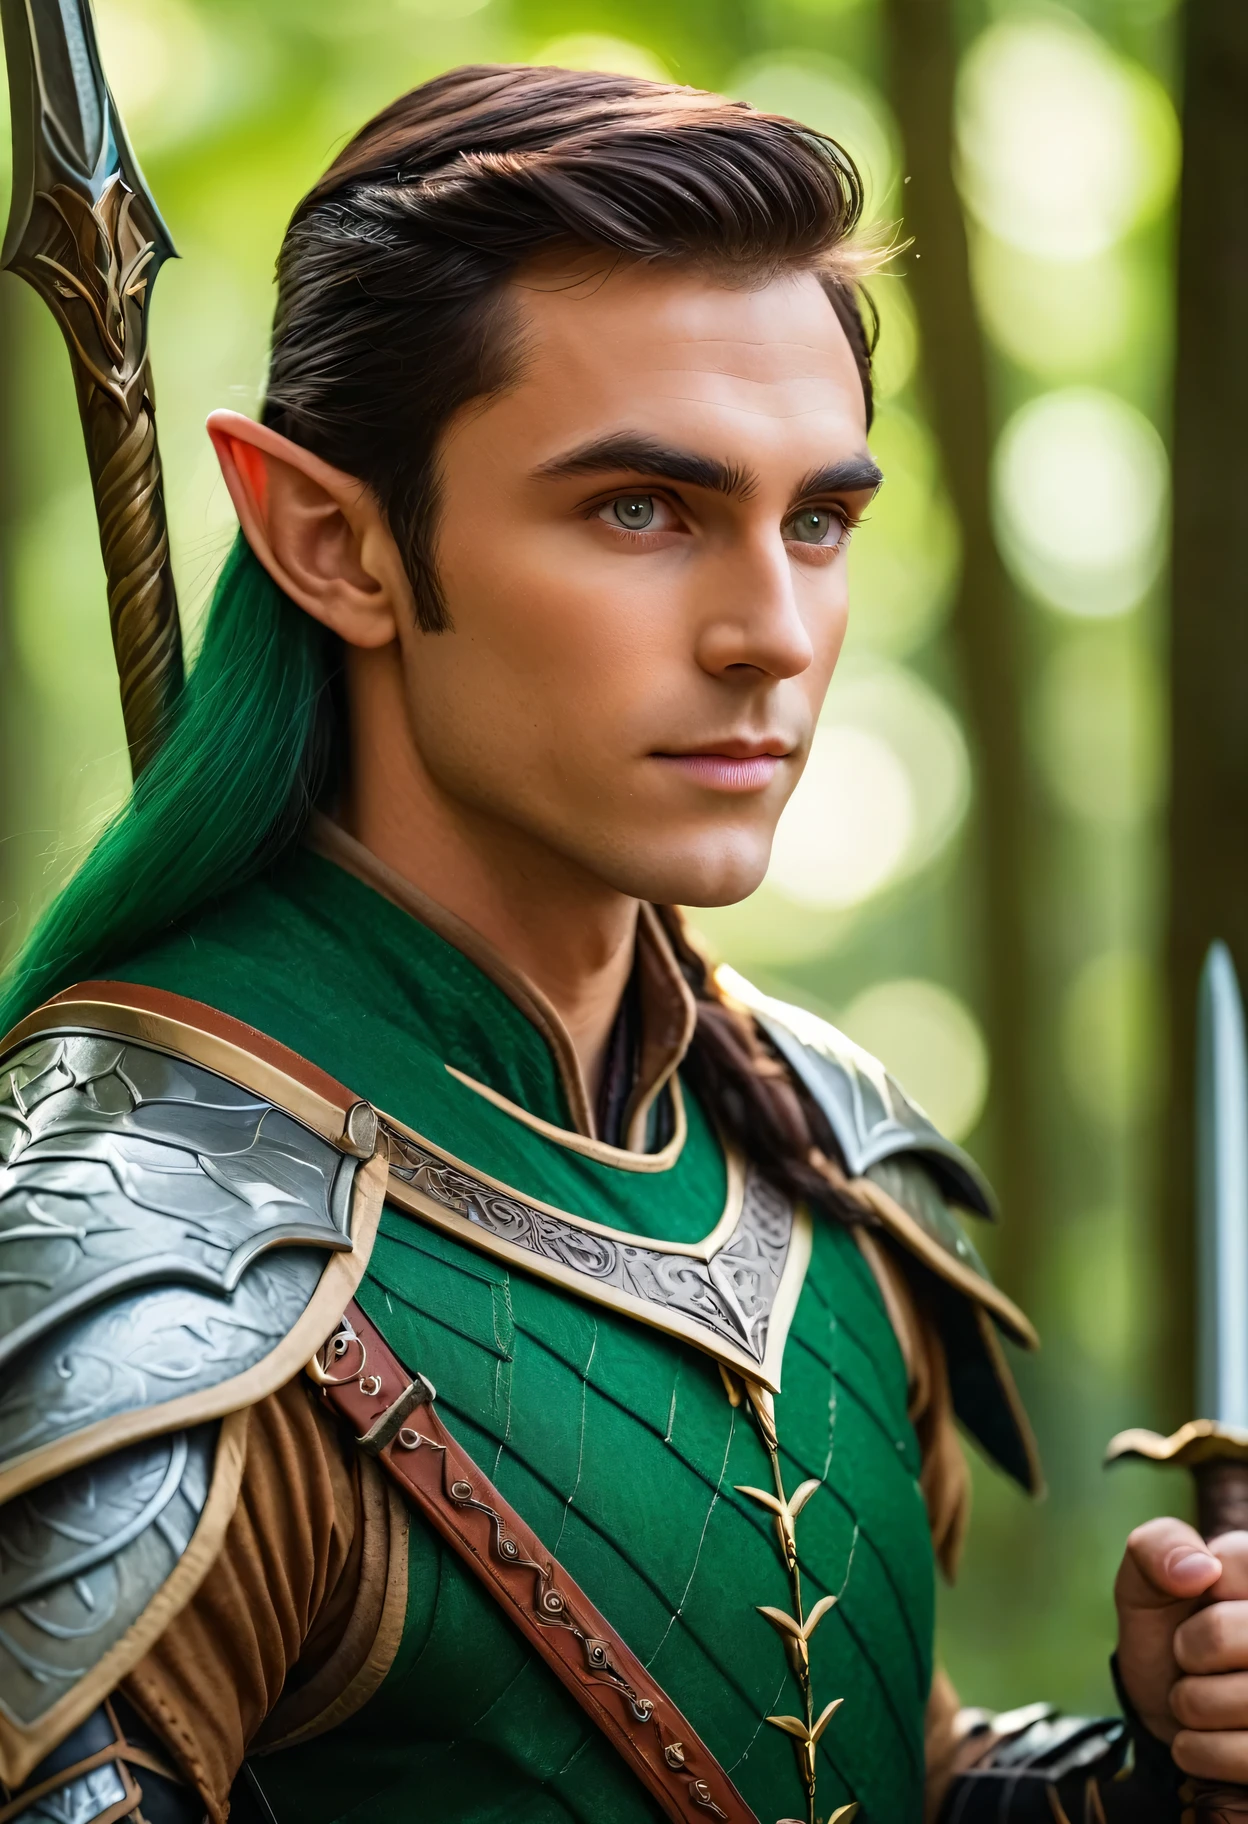 ProFessional photography For an elite magazine, an ElF warrior in gorgeous armor with intricate green painting, an ElF warrior posing with an elF sword in the shade oF Forest trees, an ElF warrior looking at the viewer with slightly narrowed eyes, A Canon EOS R5 camera with a Canon RF lens 100-500 ملم F4.5-7.1 لتر يو اس ام, 500 ملم, 1/500 ثانية., F/7.1 و ايزو 1000.